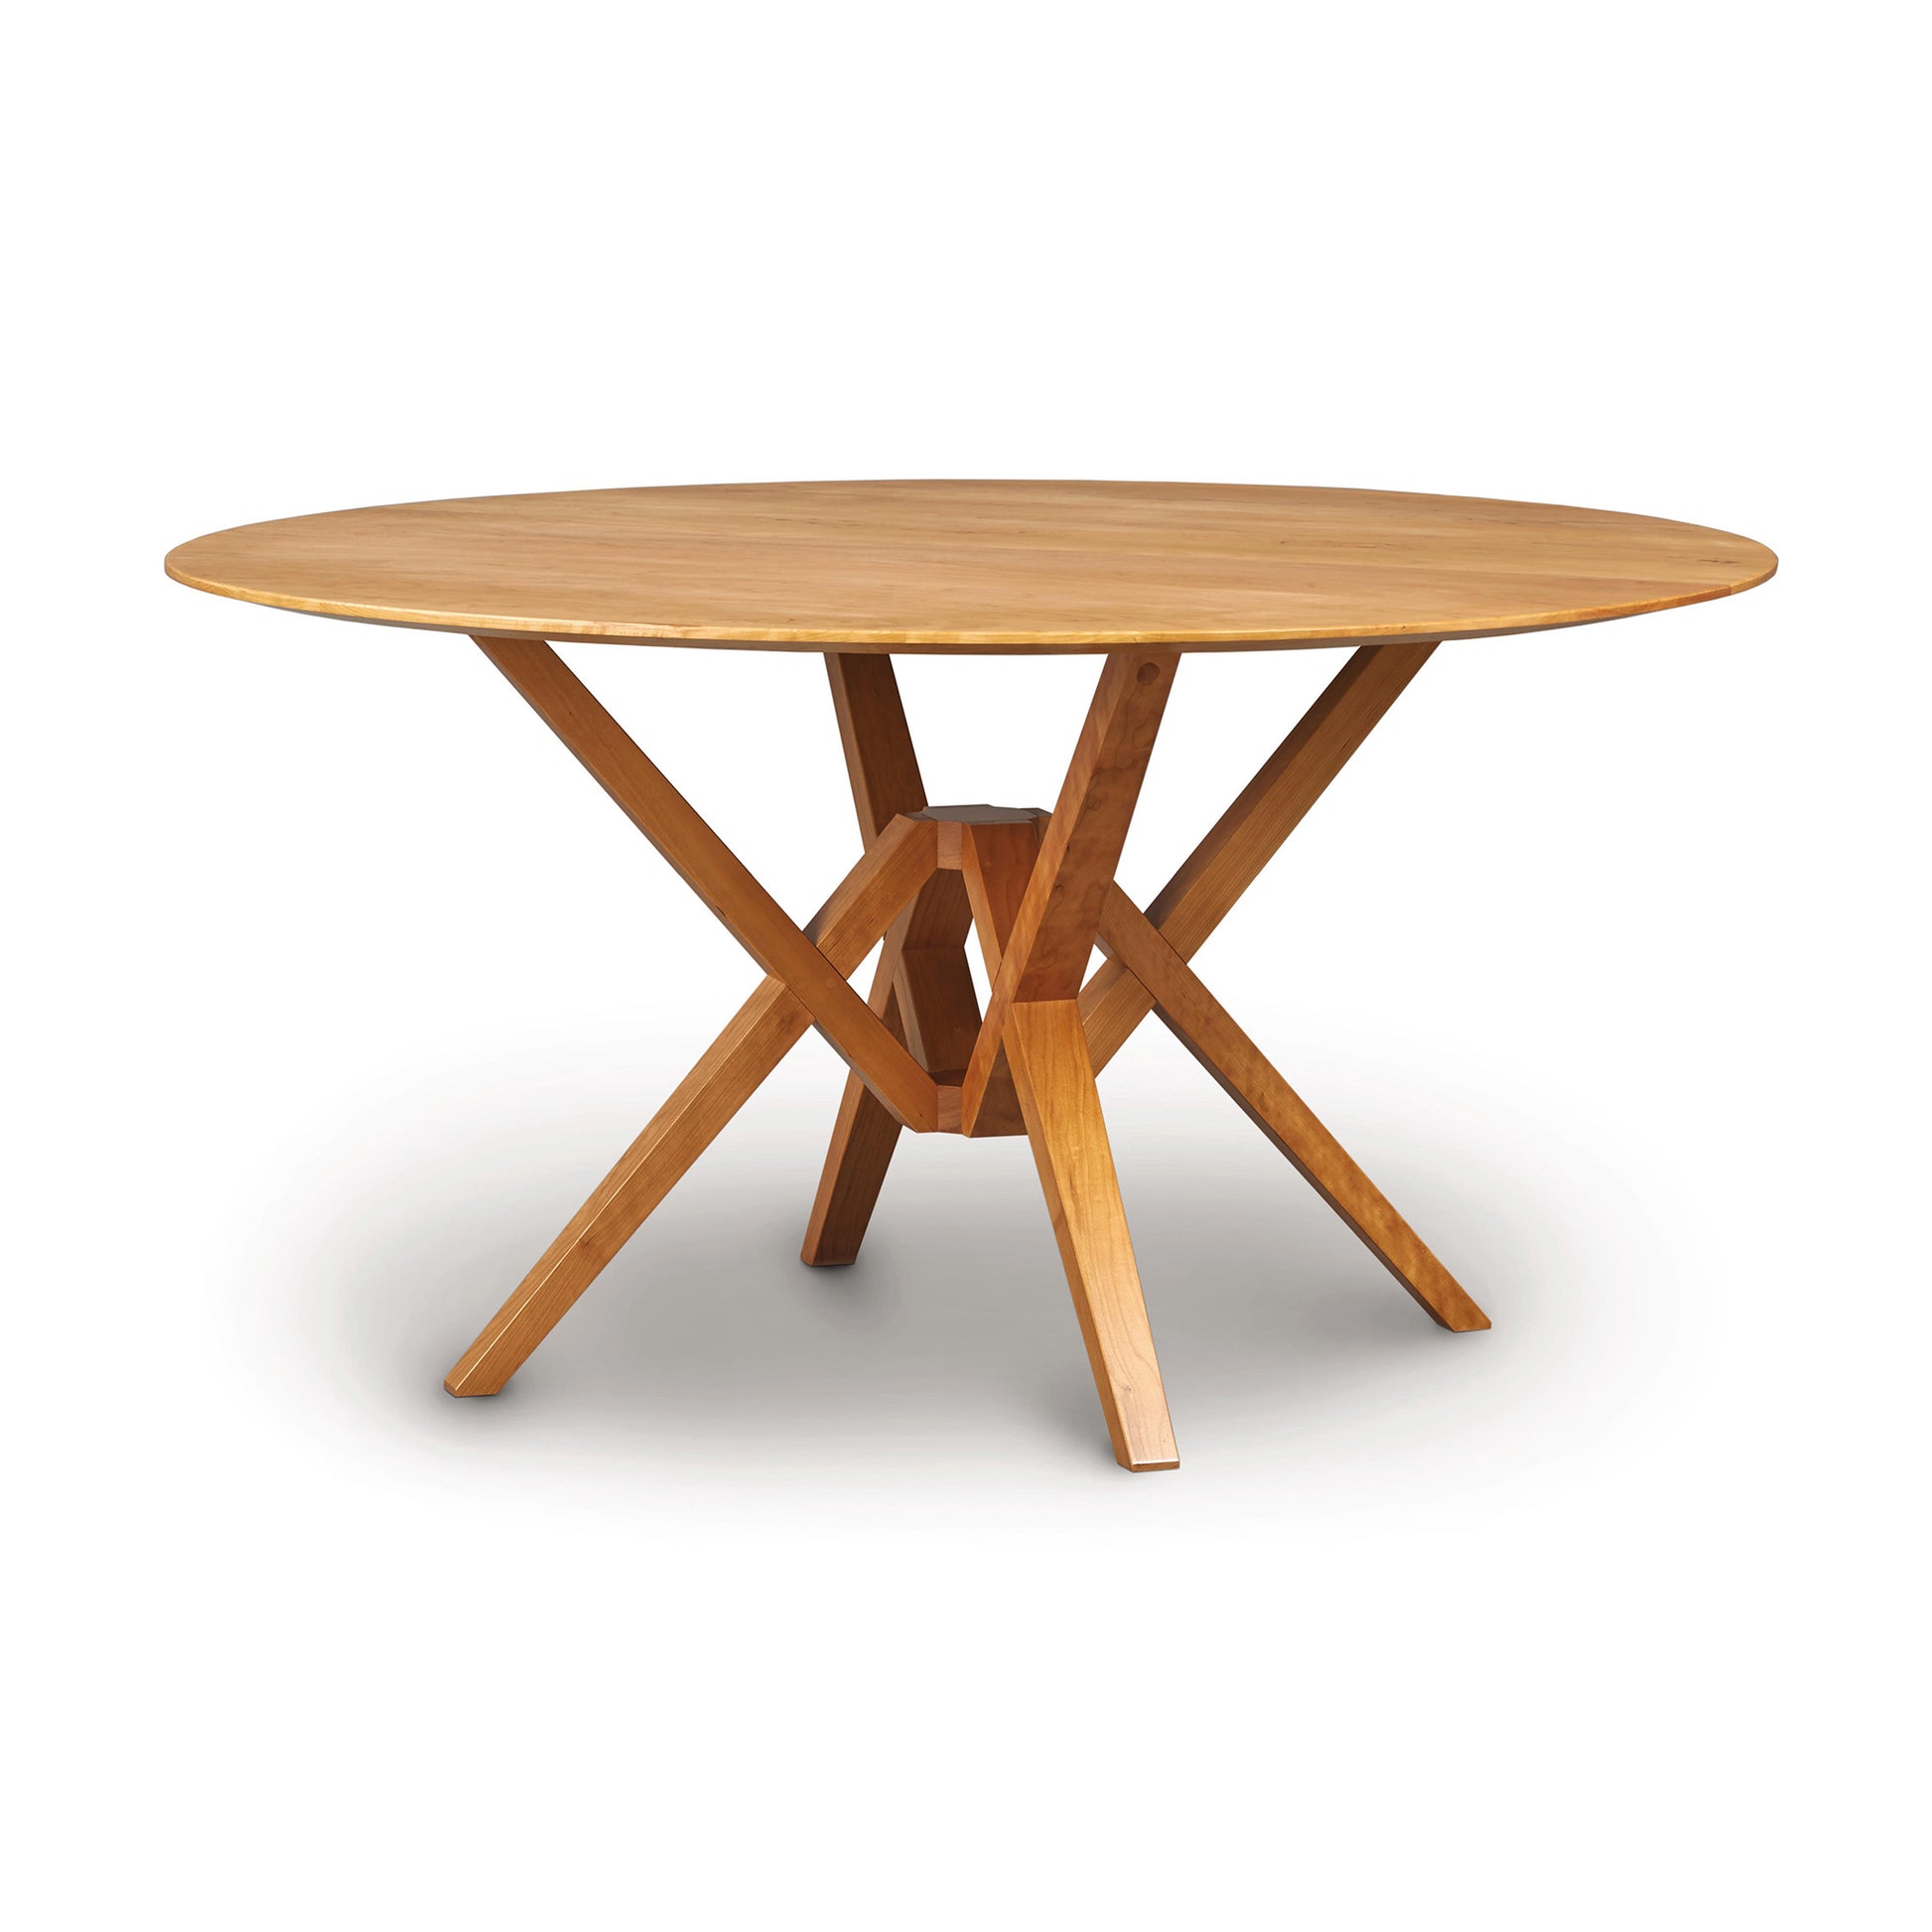 Copeland Furniture's Exeter Round Solid Top Dining Table made from sustainably harvested hardwoods with a cross-shaped base on a white background.